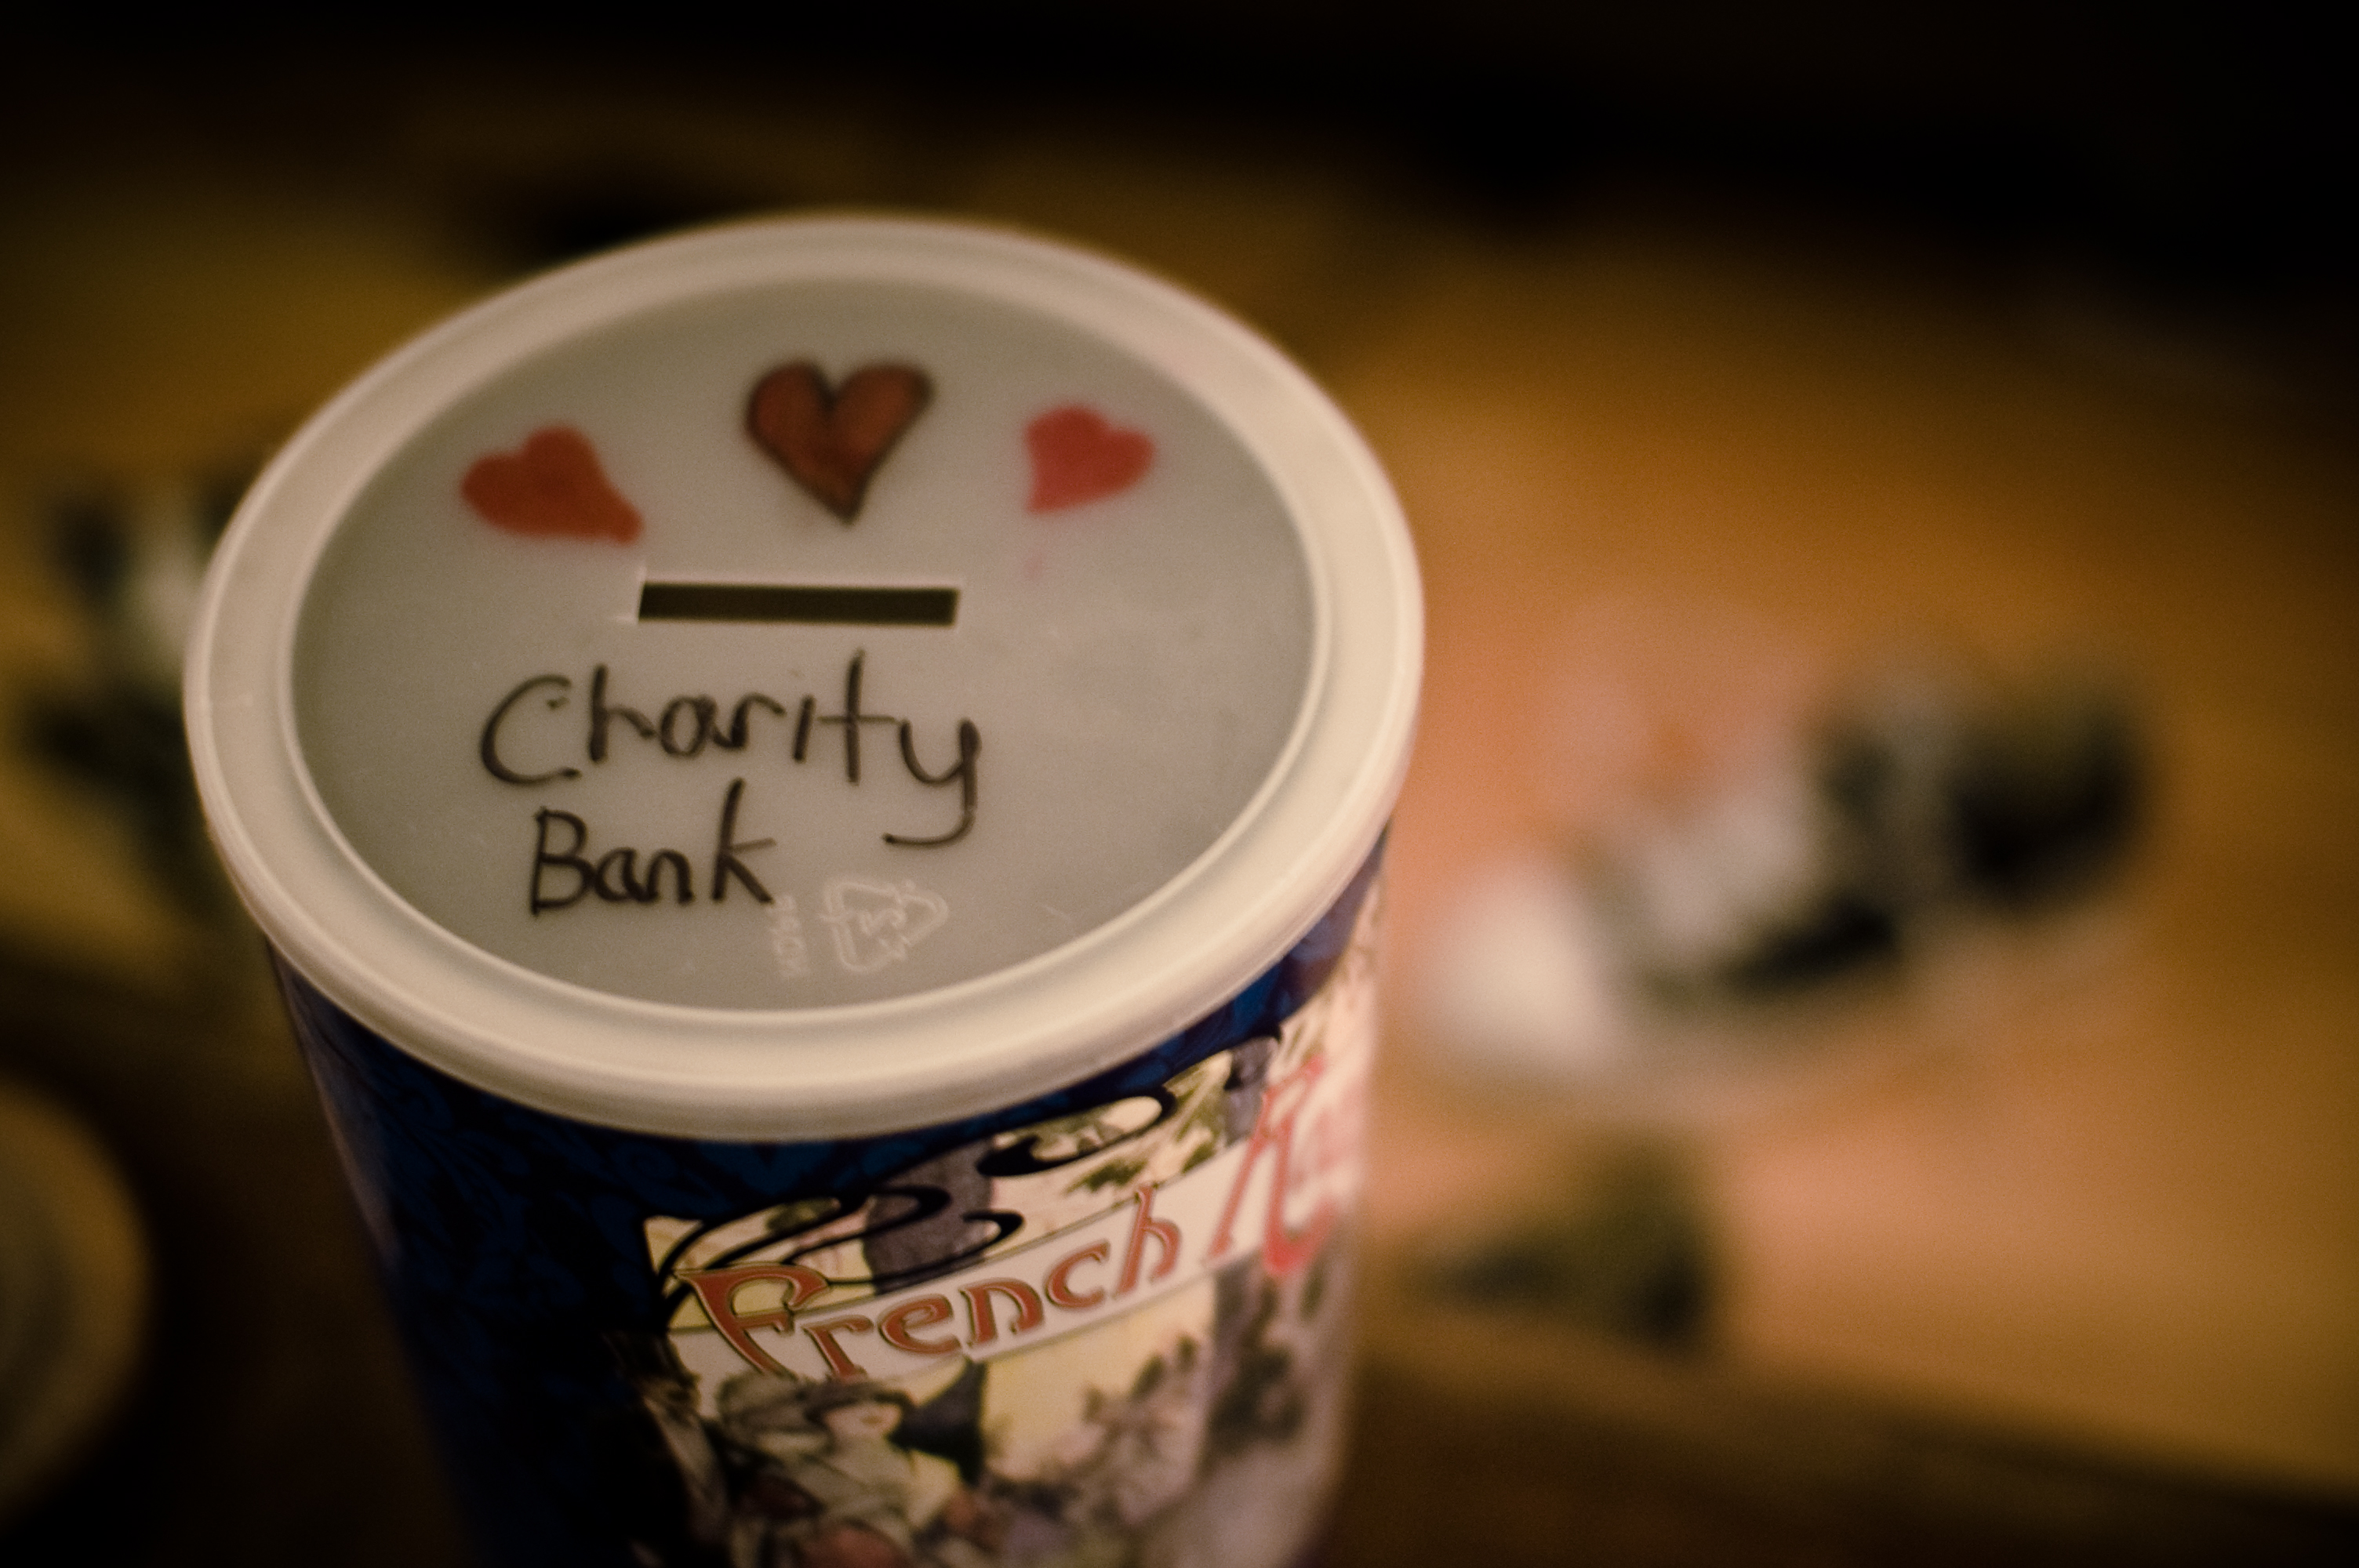 charity bank can